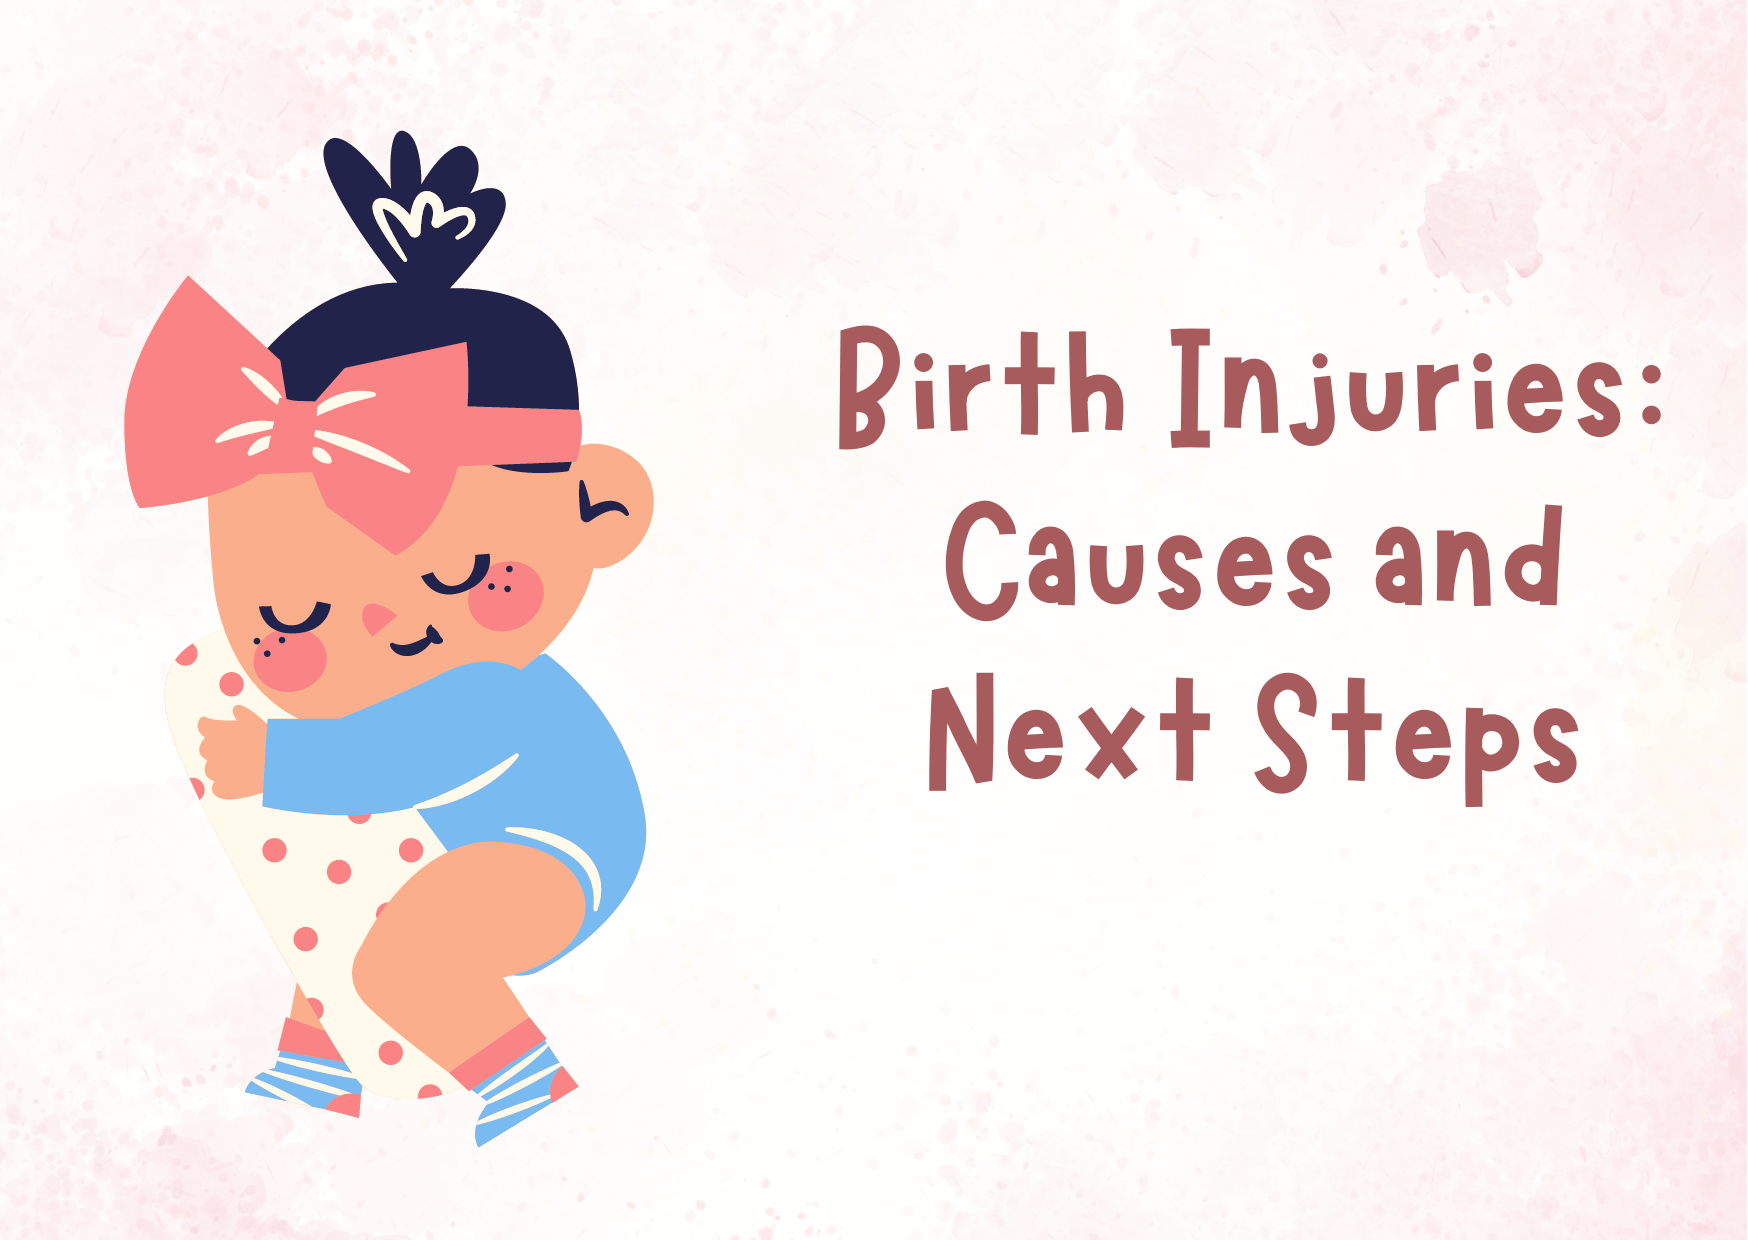 Birth Injuries: Causes and Next Steps